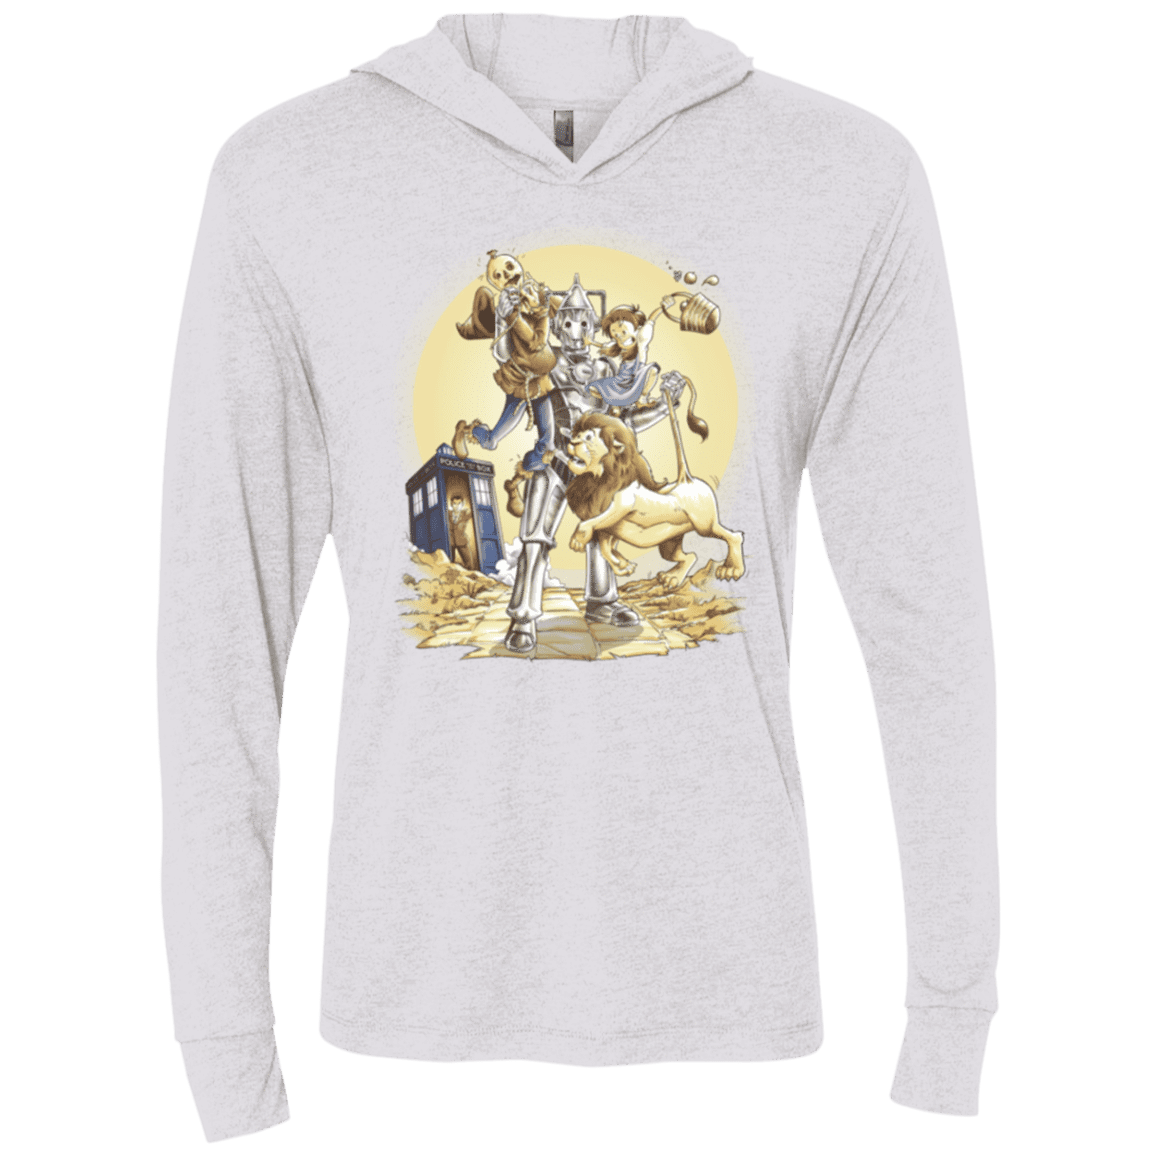 T-Shirts Heather White / X-Small Doctor Oz Triblend Long Sleeve Hoodie Tee